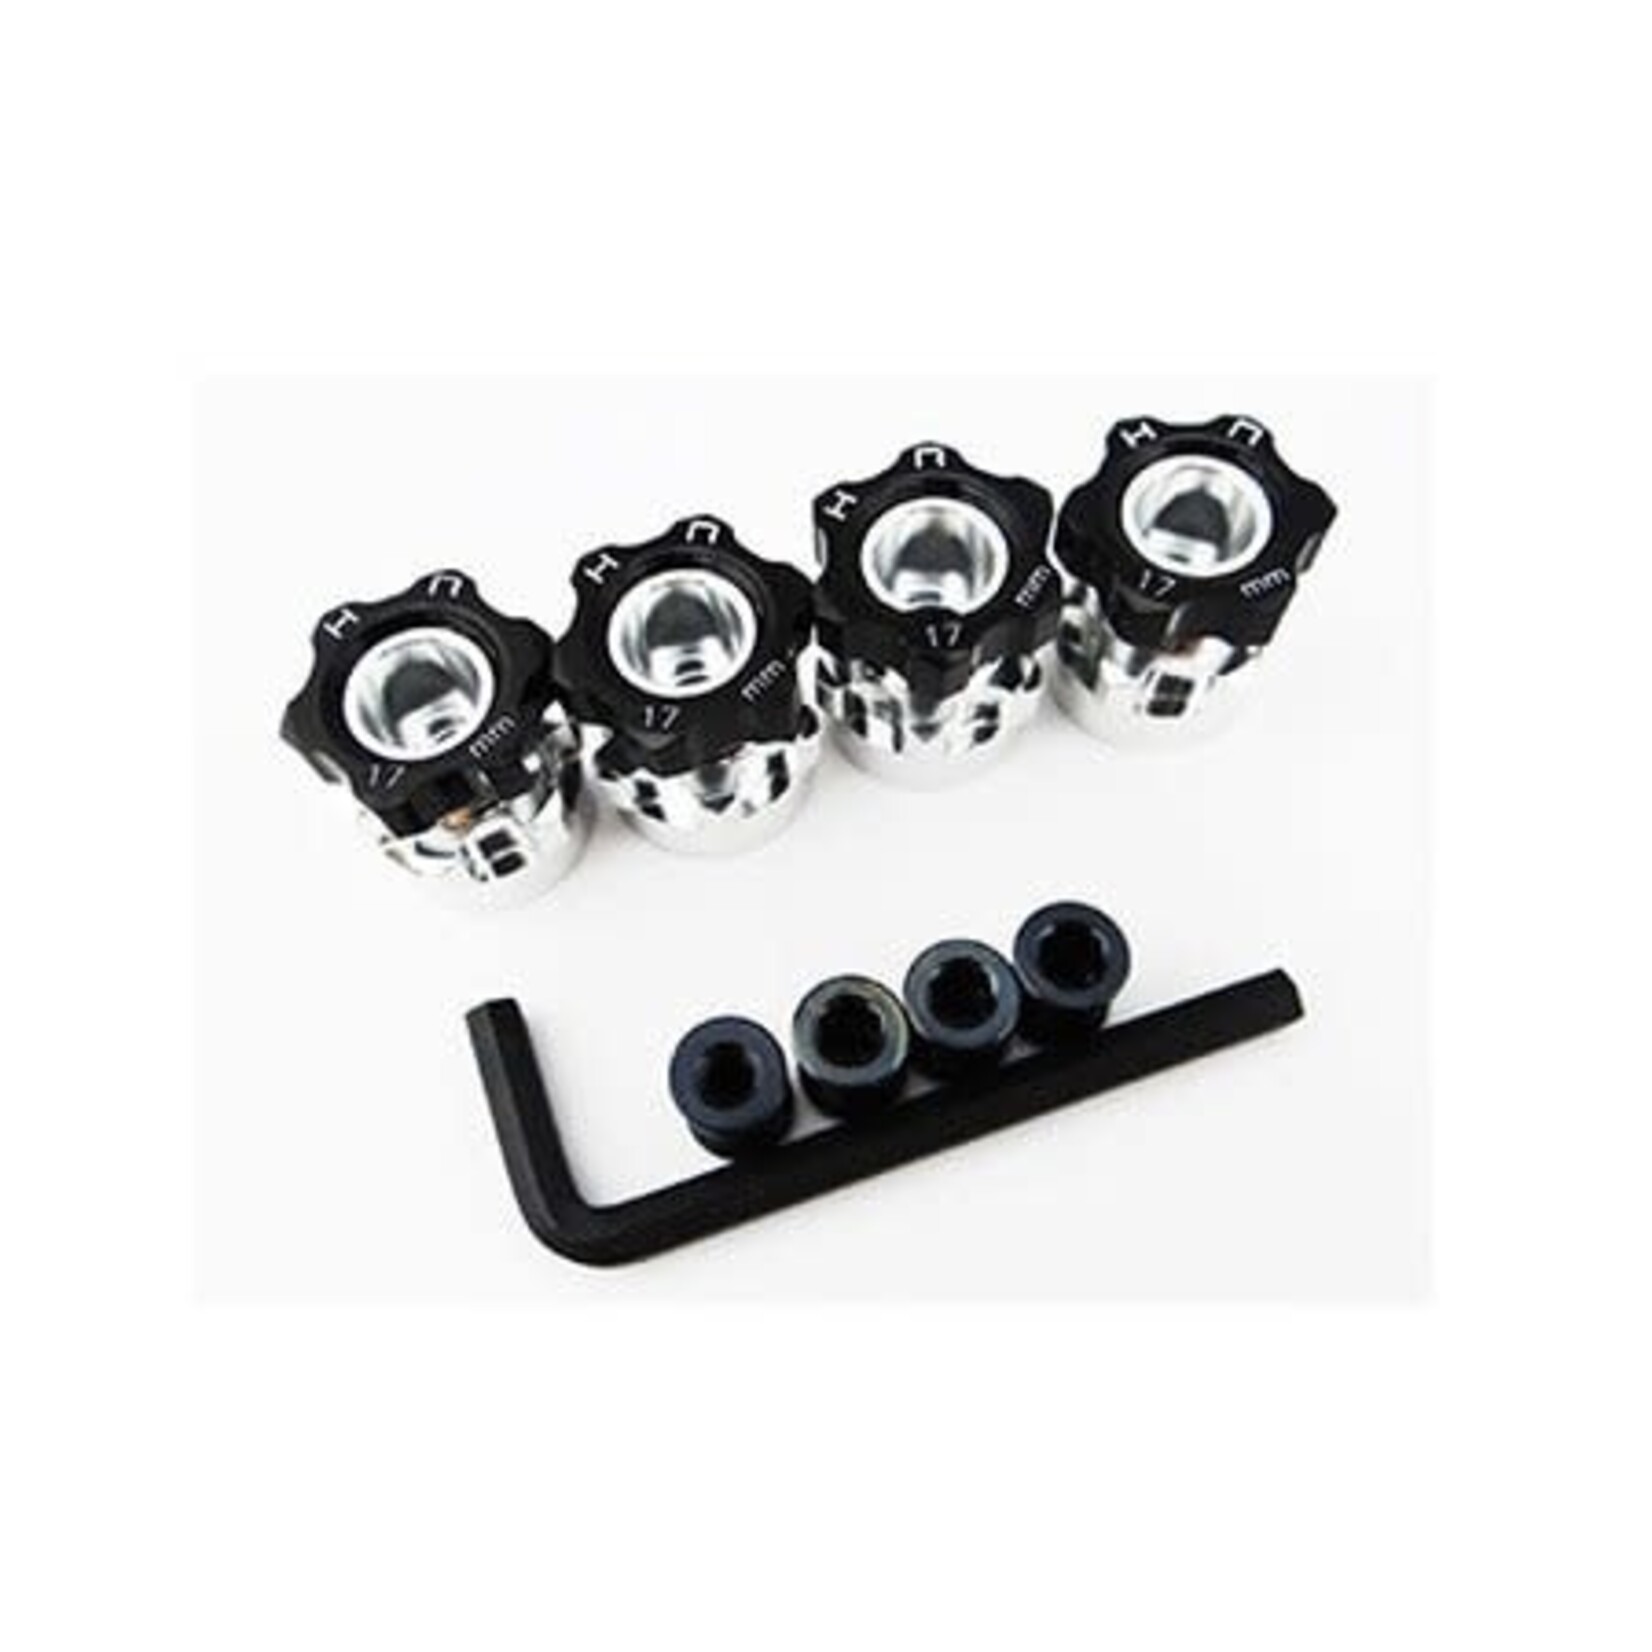 Hot Racing HRAWH17HS01 Hex Hub Adapters, 12mm to 17mm w/ 6mm Offset